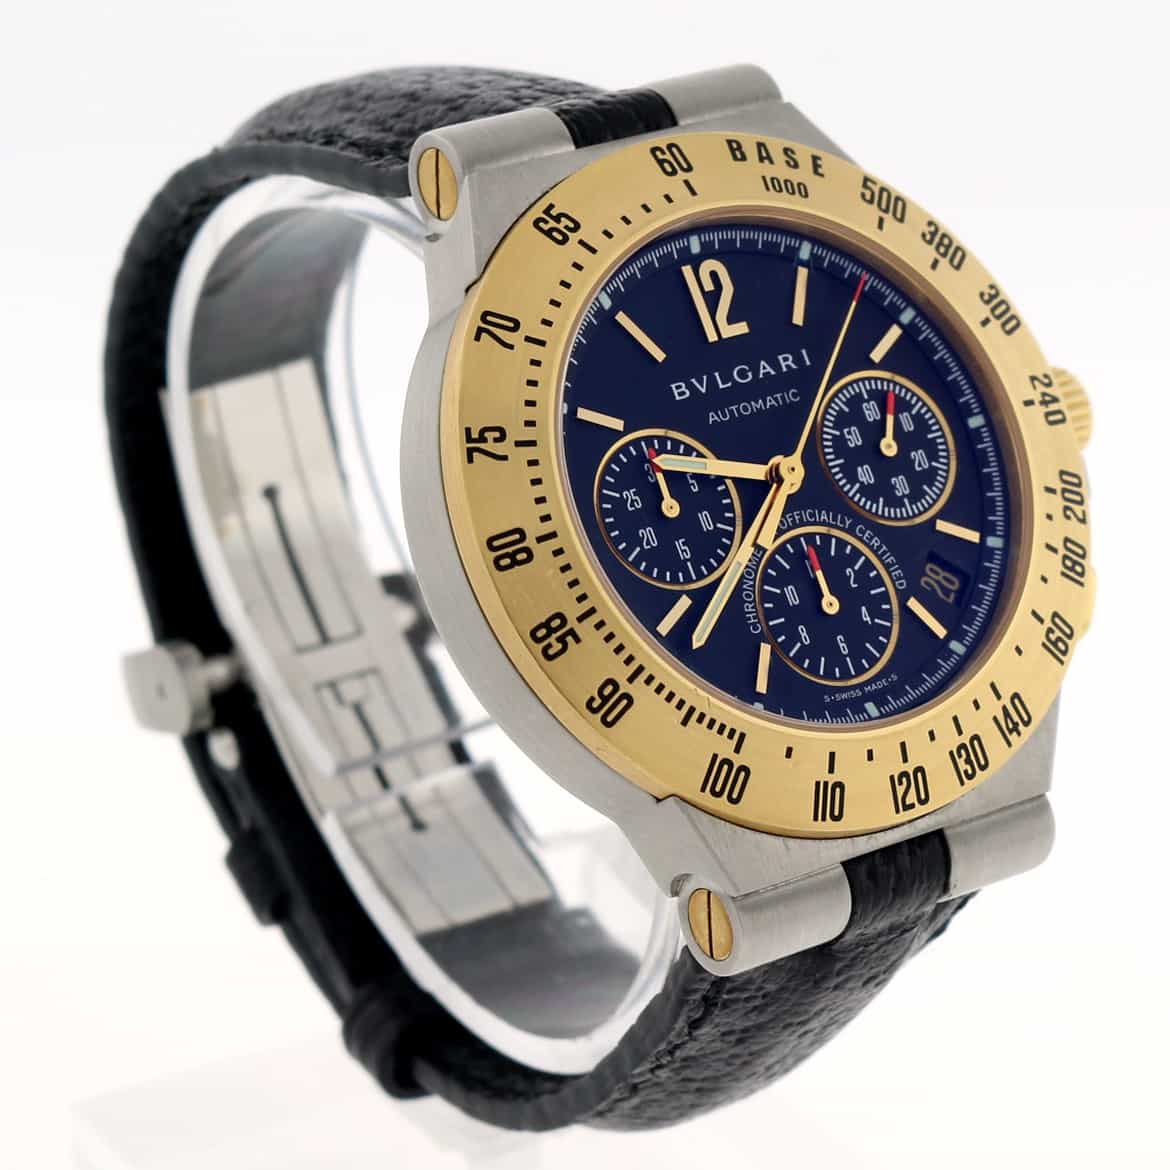 Bvlgari Diagono Chronograph 2-Tone 18K Yellow Gold & Stainless Steel  Automatic Mens Watch CH 40 SG TA